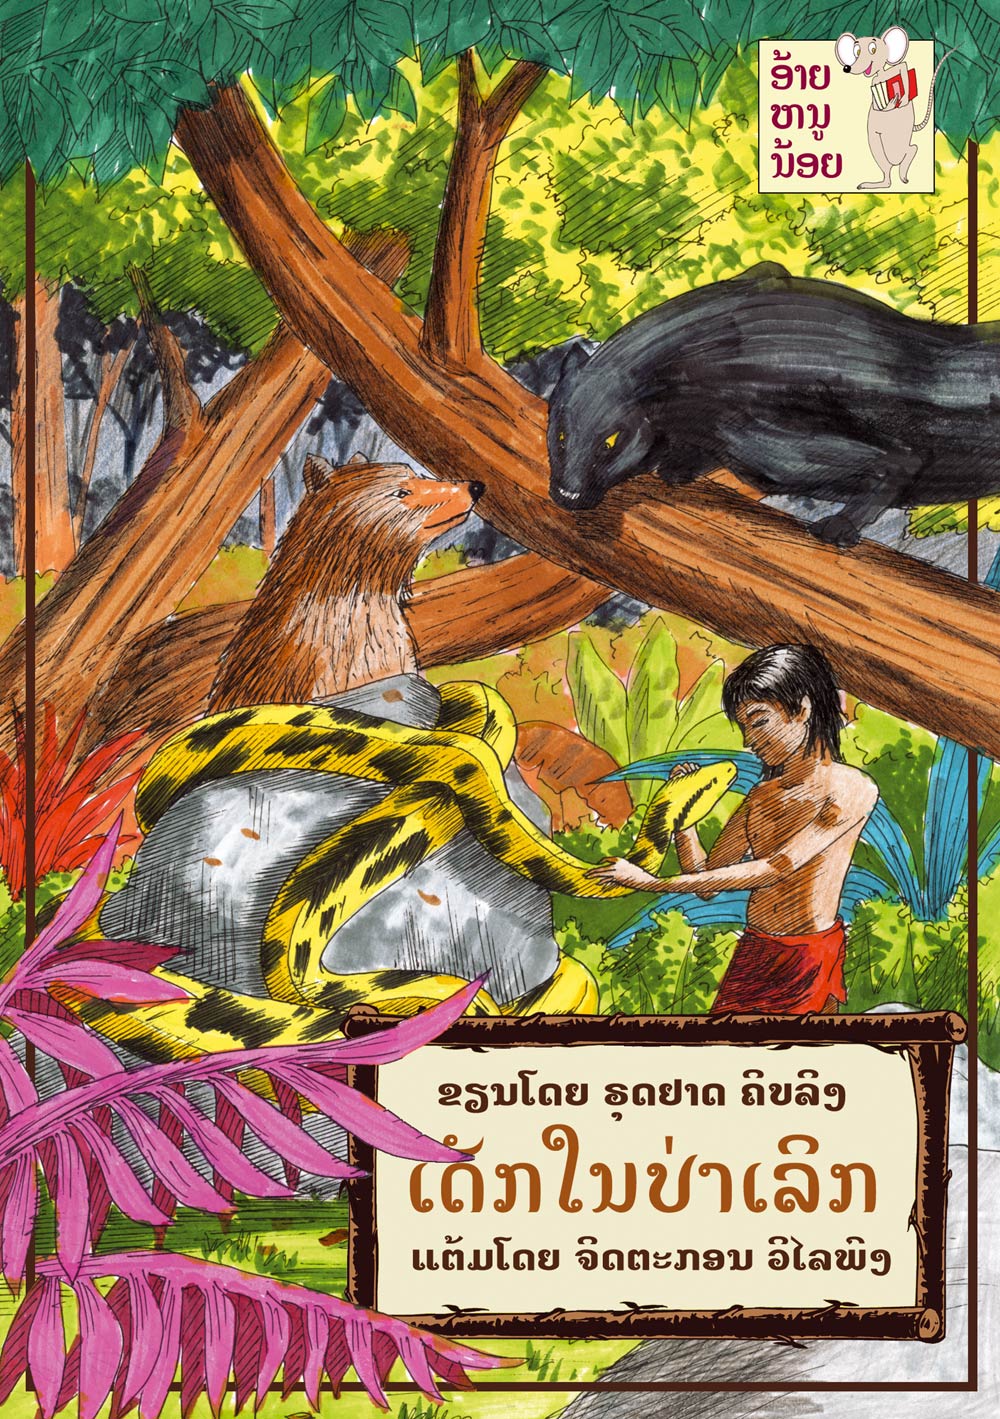 The Jungle Boy large book cover, published in Lao language